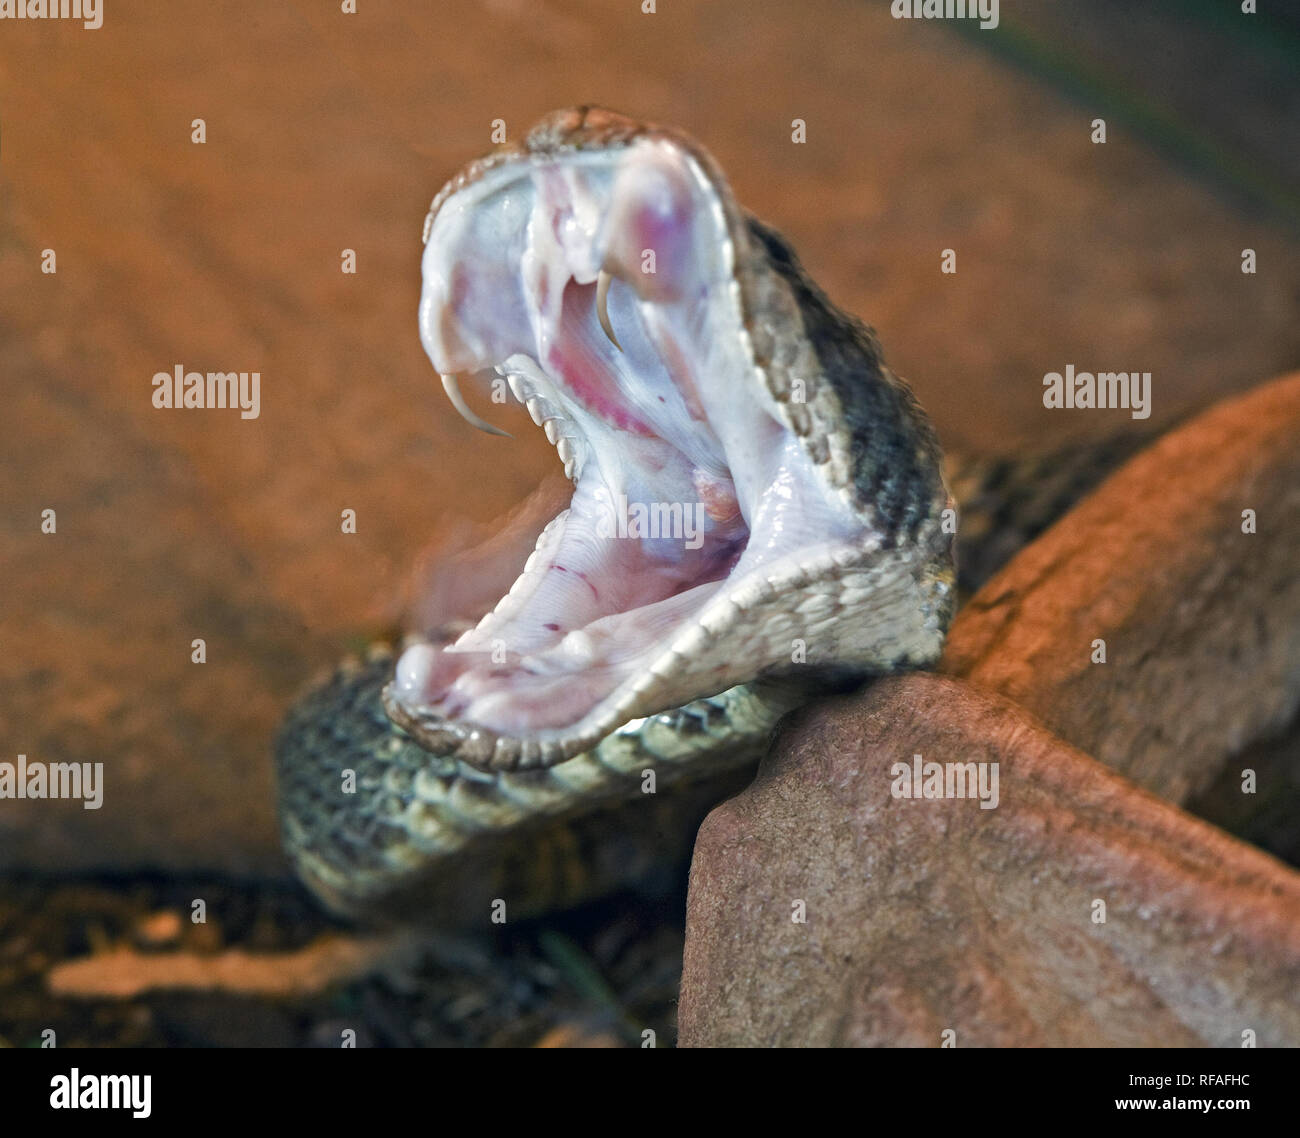 Fangs out, a Western rattlesnake, Crotalus viridis, makes a strike with open mouth. Stock Photo